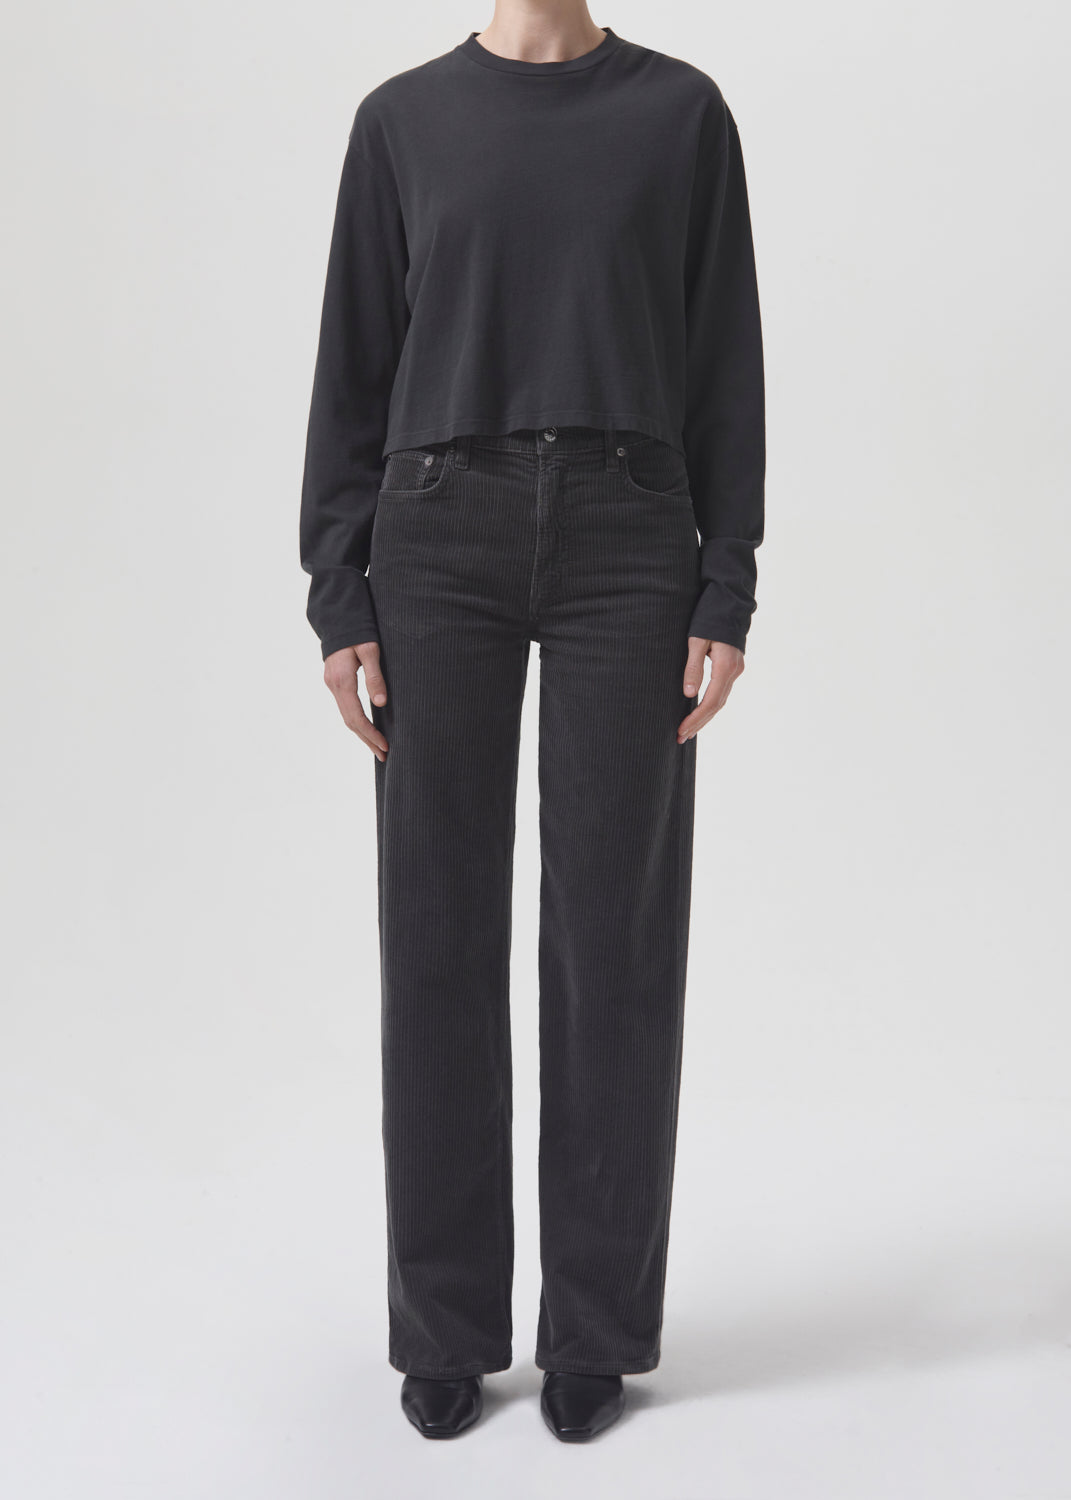 Perfect Line Stretch Modal Dolcevita Sweater